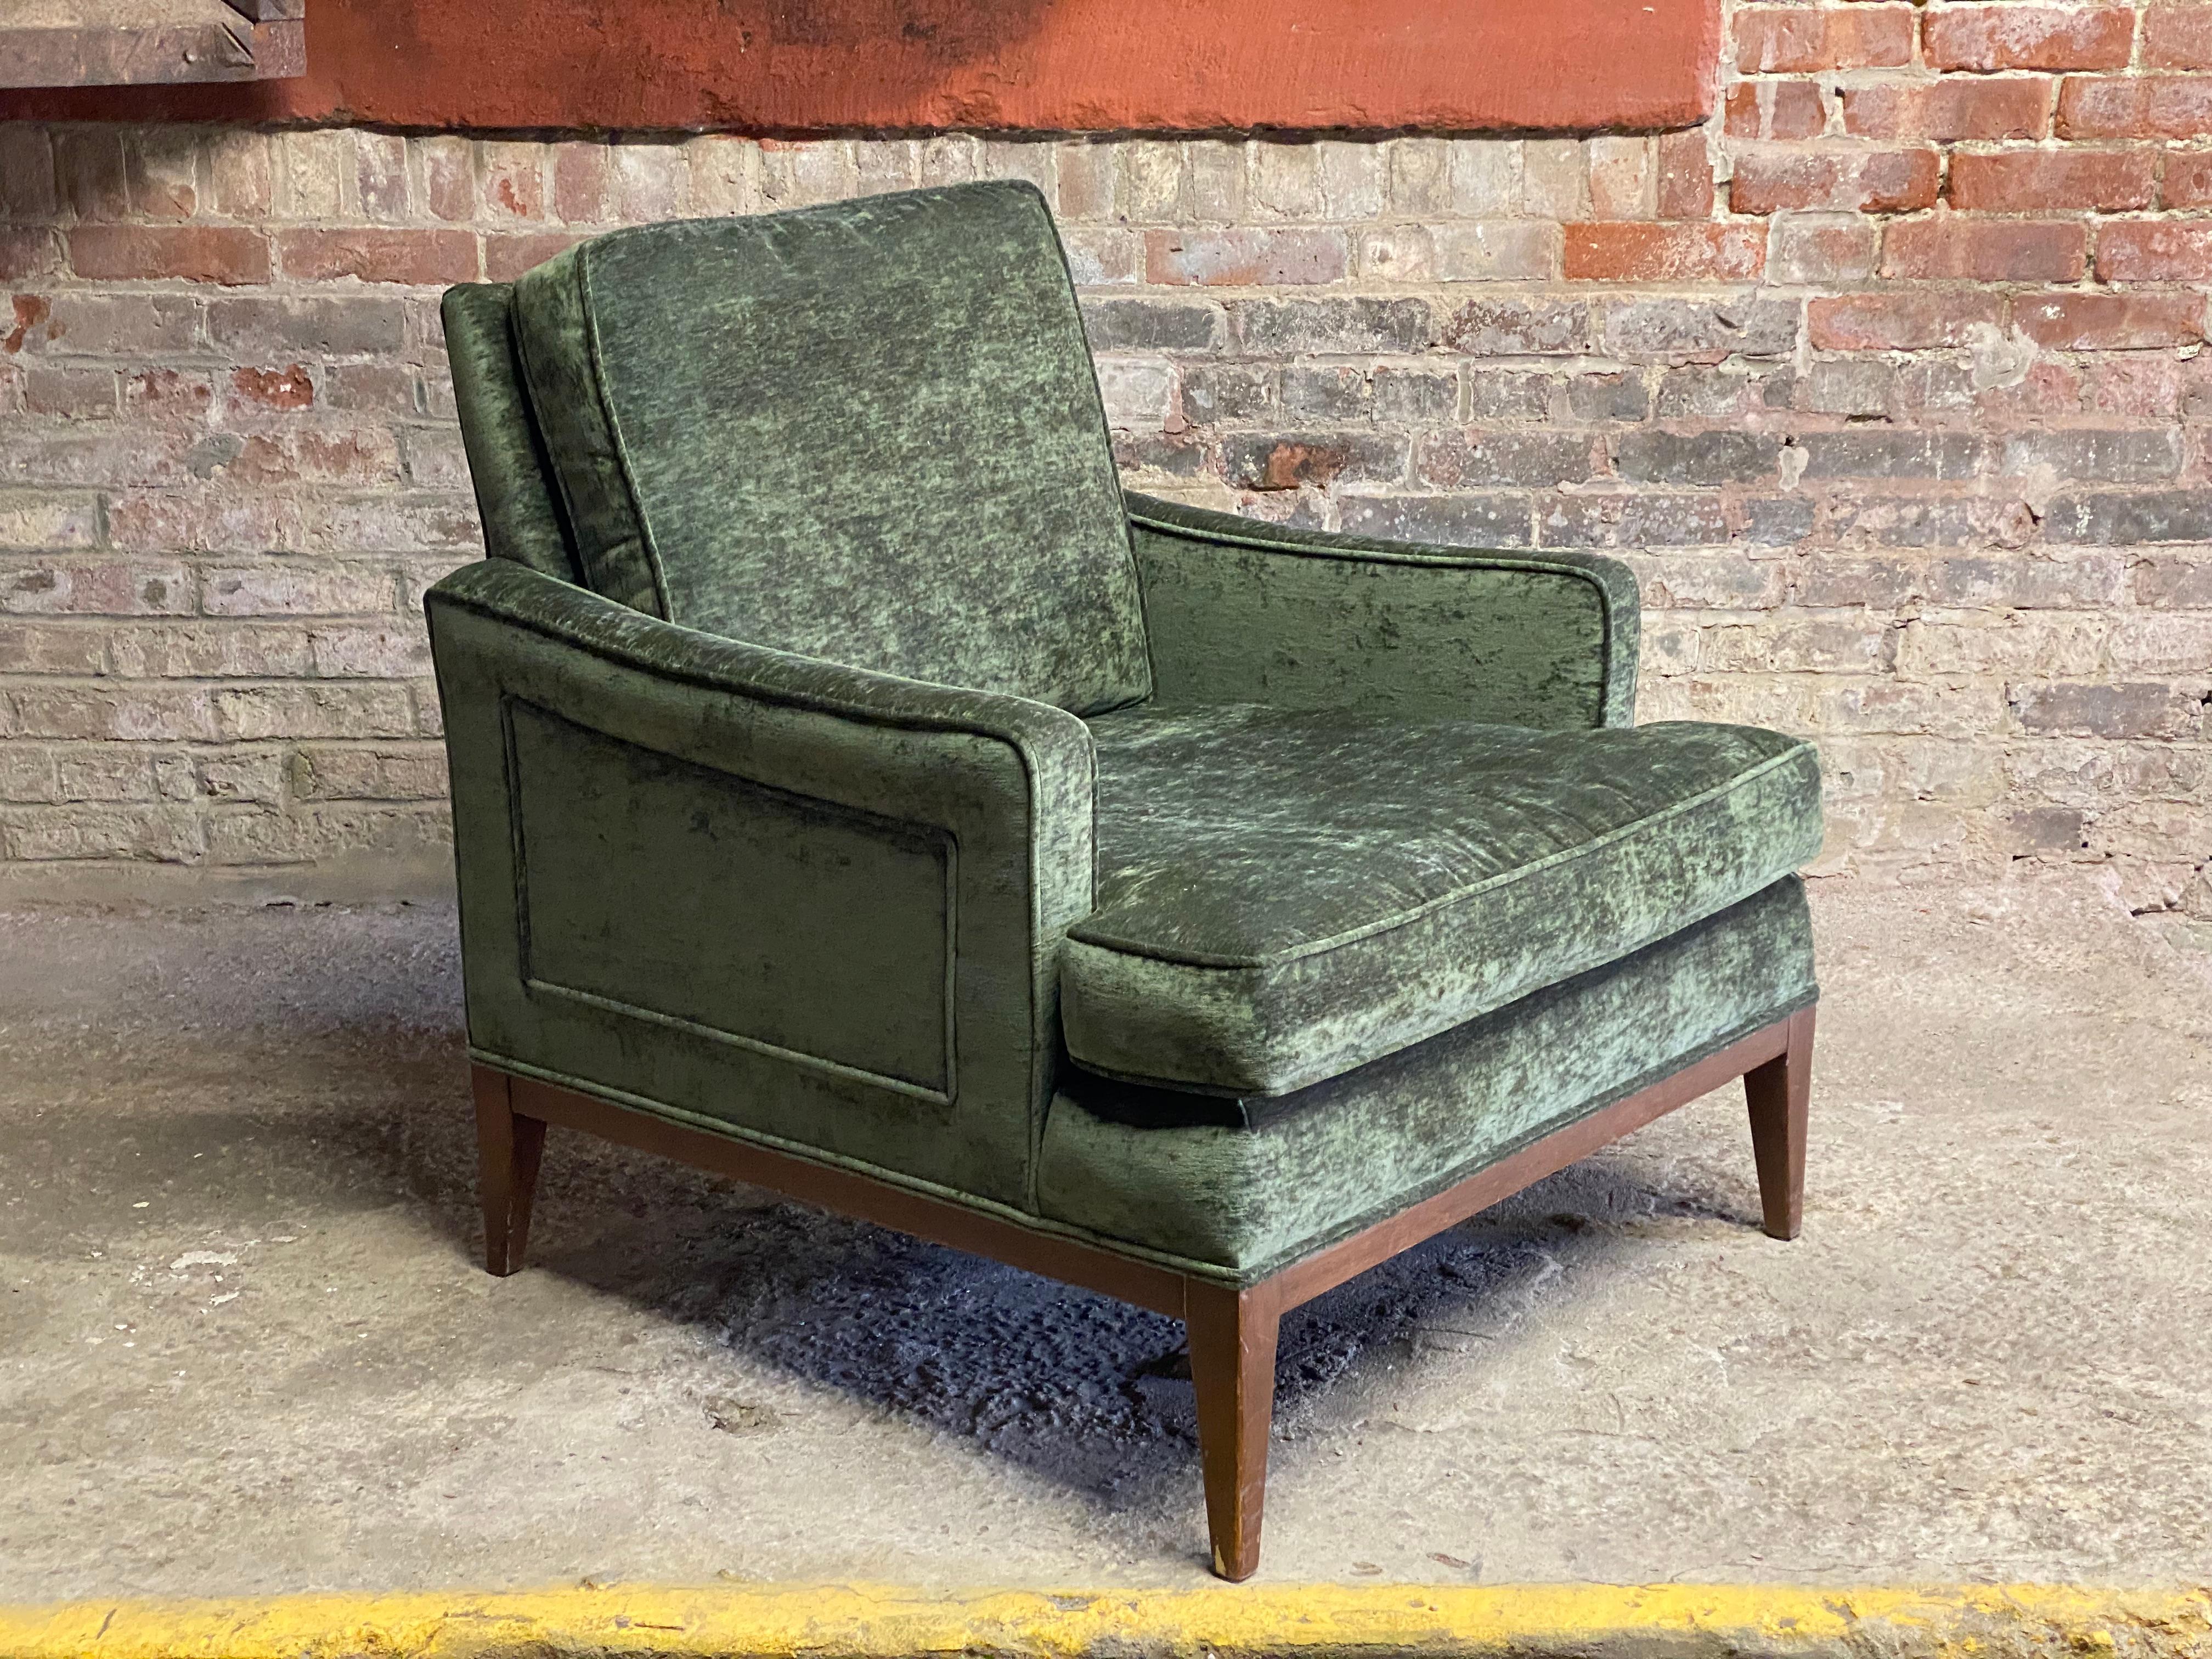 Luxurious Hollywood Regency Era upholstered armchair. Reupholstered in new Crypton sage green crushed velvet and cushions. Crypton fabric is one of the most coveted fabrics due to its durability and stain resisting features. Great comfort is just